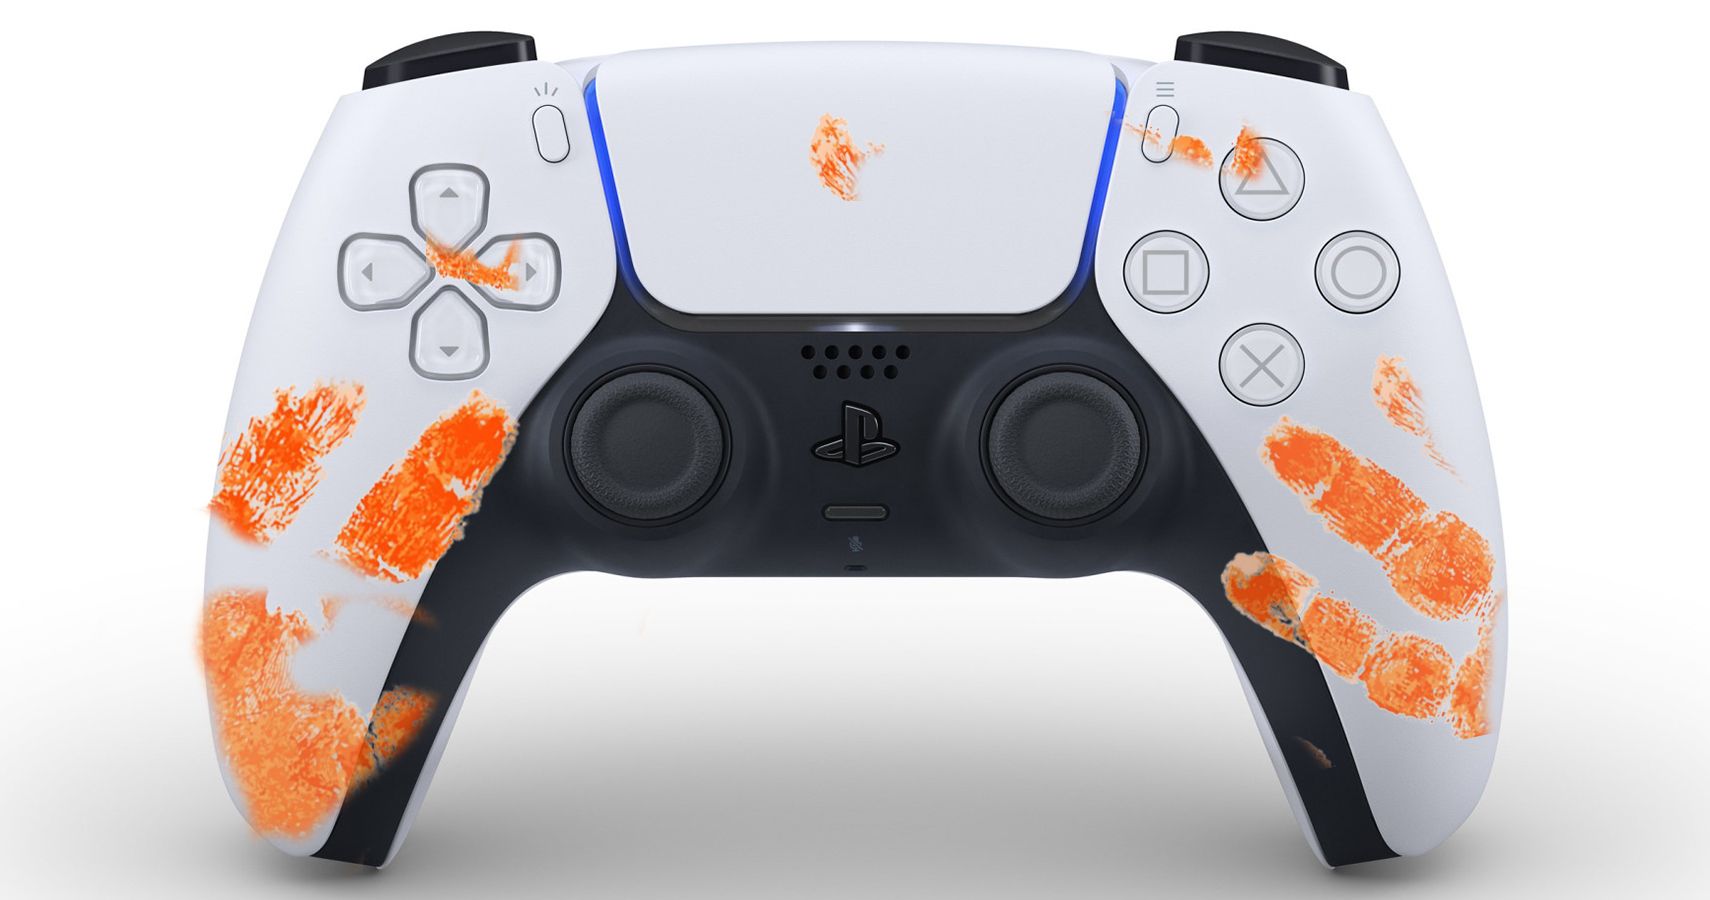 The New Playstation 5 Controller Will Be The WORST For Doritos Dust